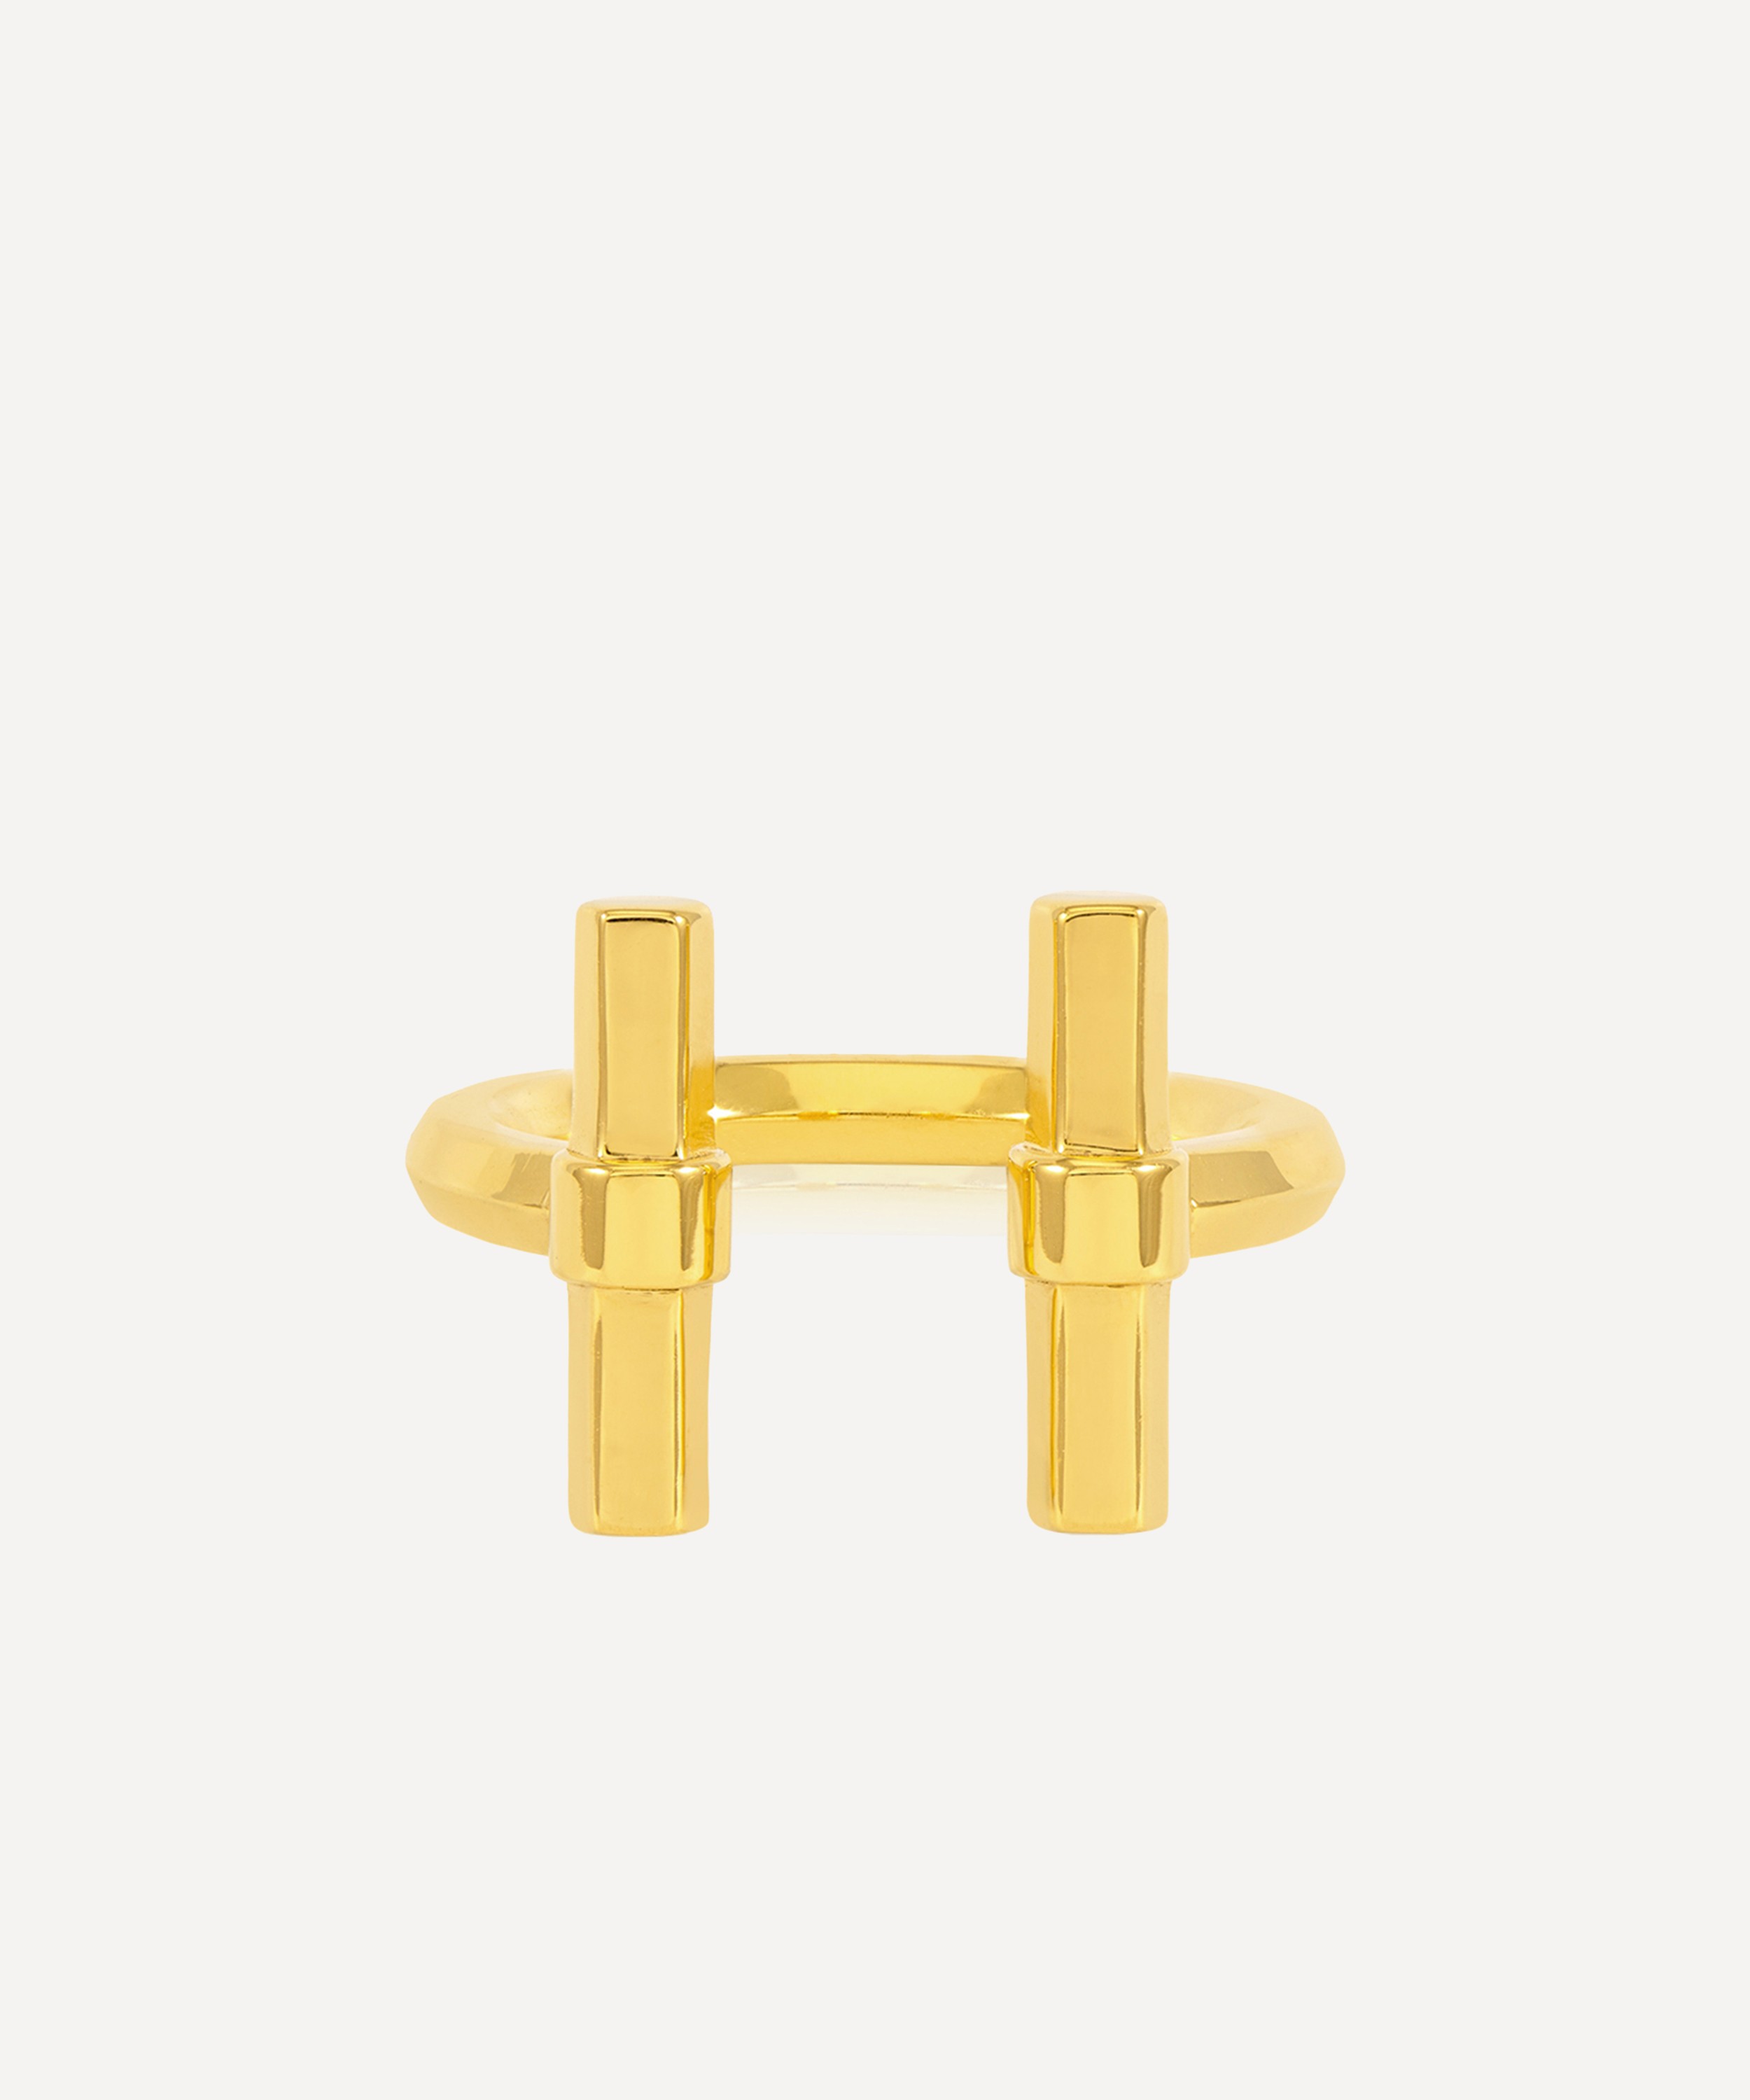 Rachel Jackson - 22ct Gold-Plated Adjustable Size T-Bar Ring